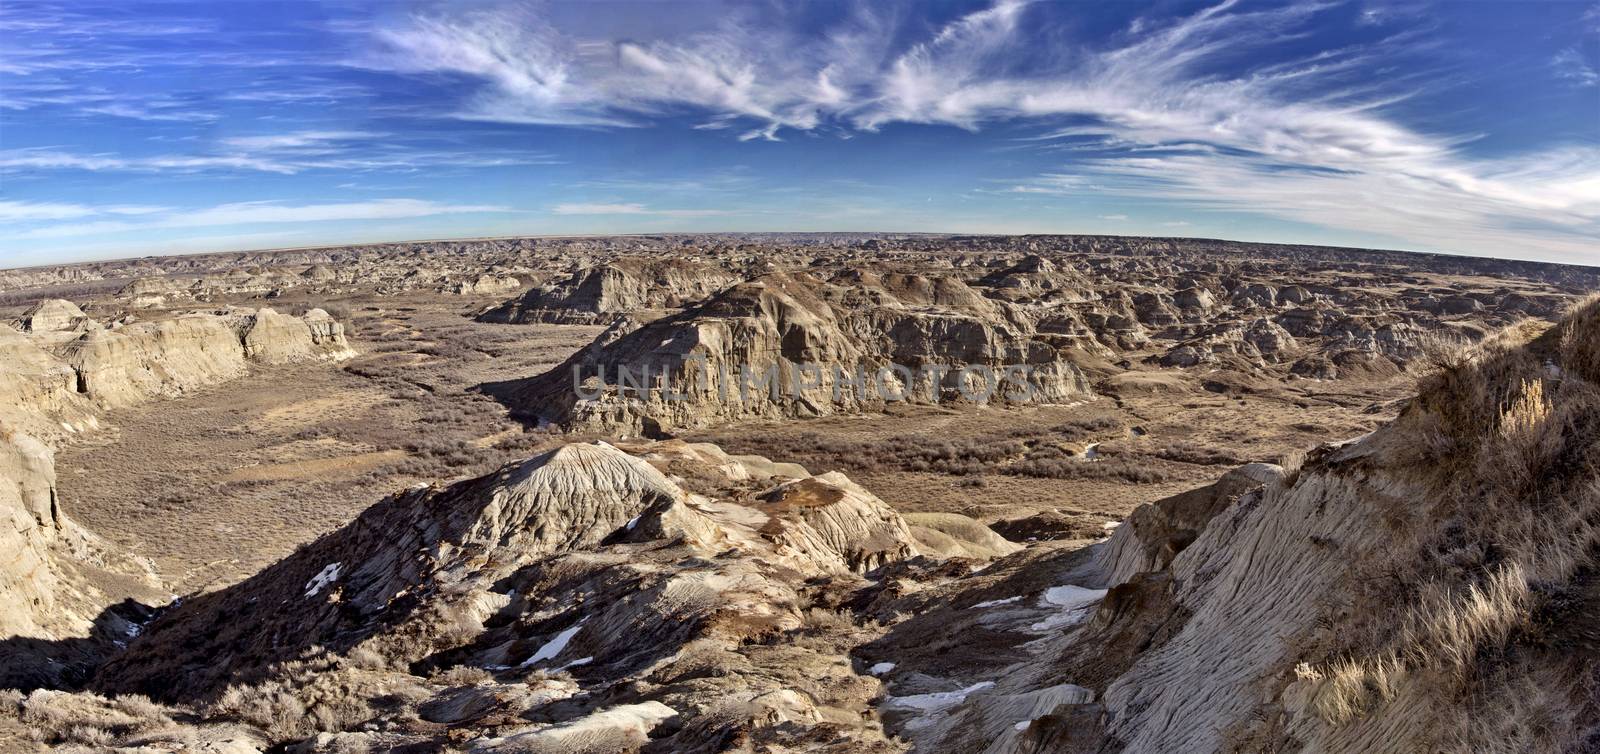 Alberta Badlands Panorama by pictureguy